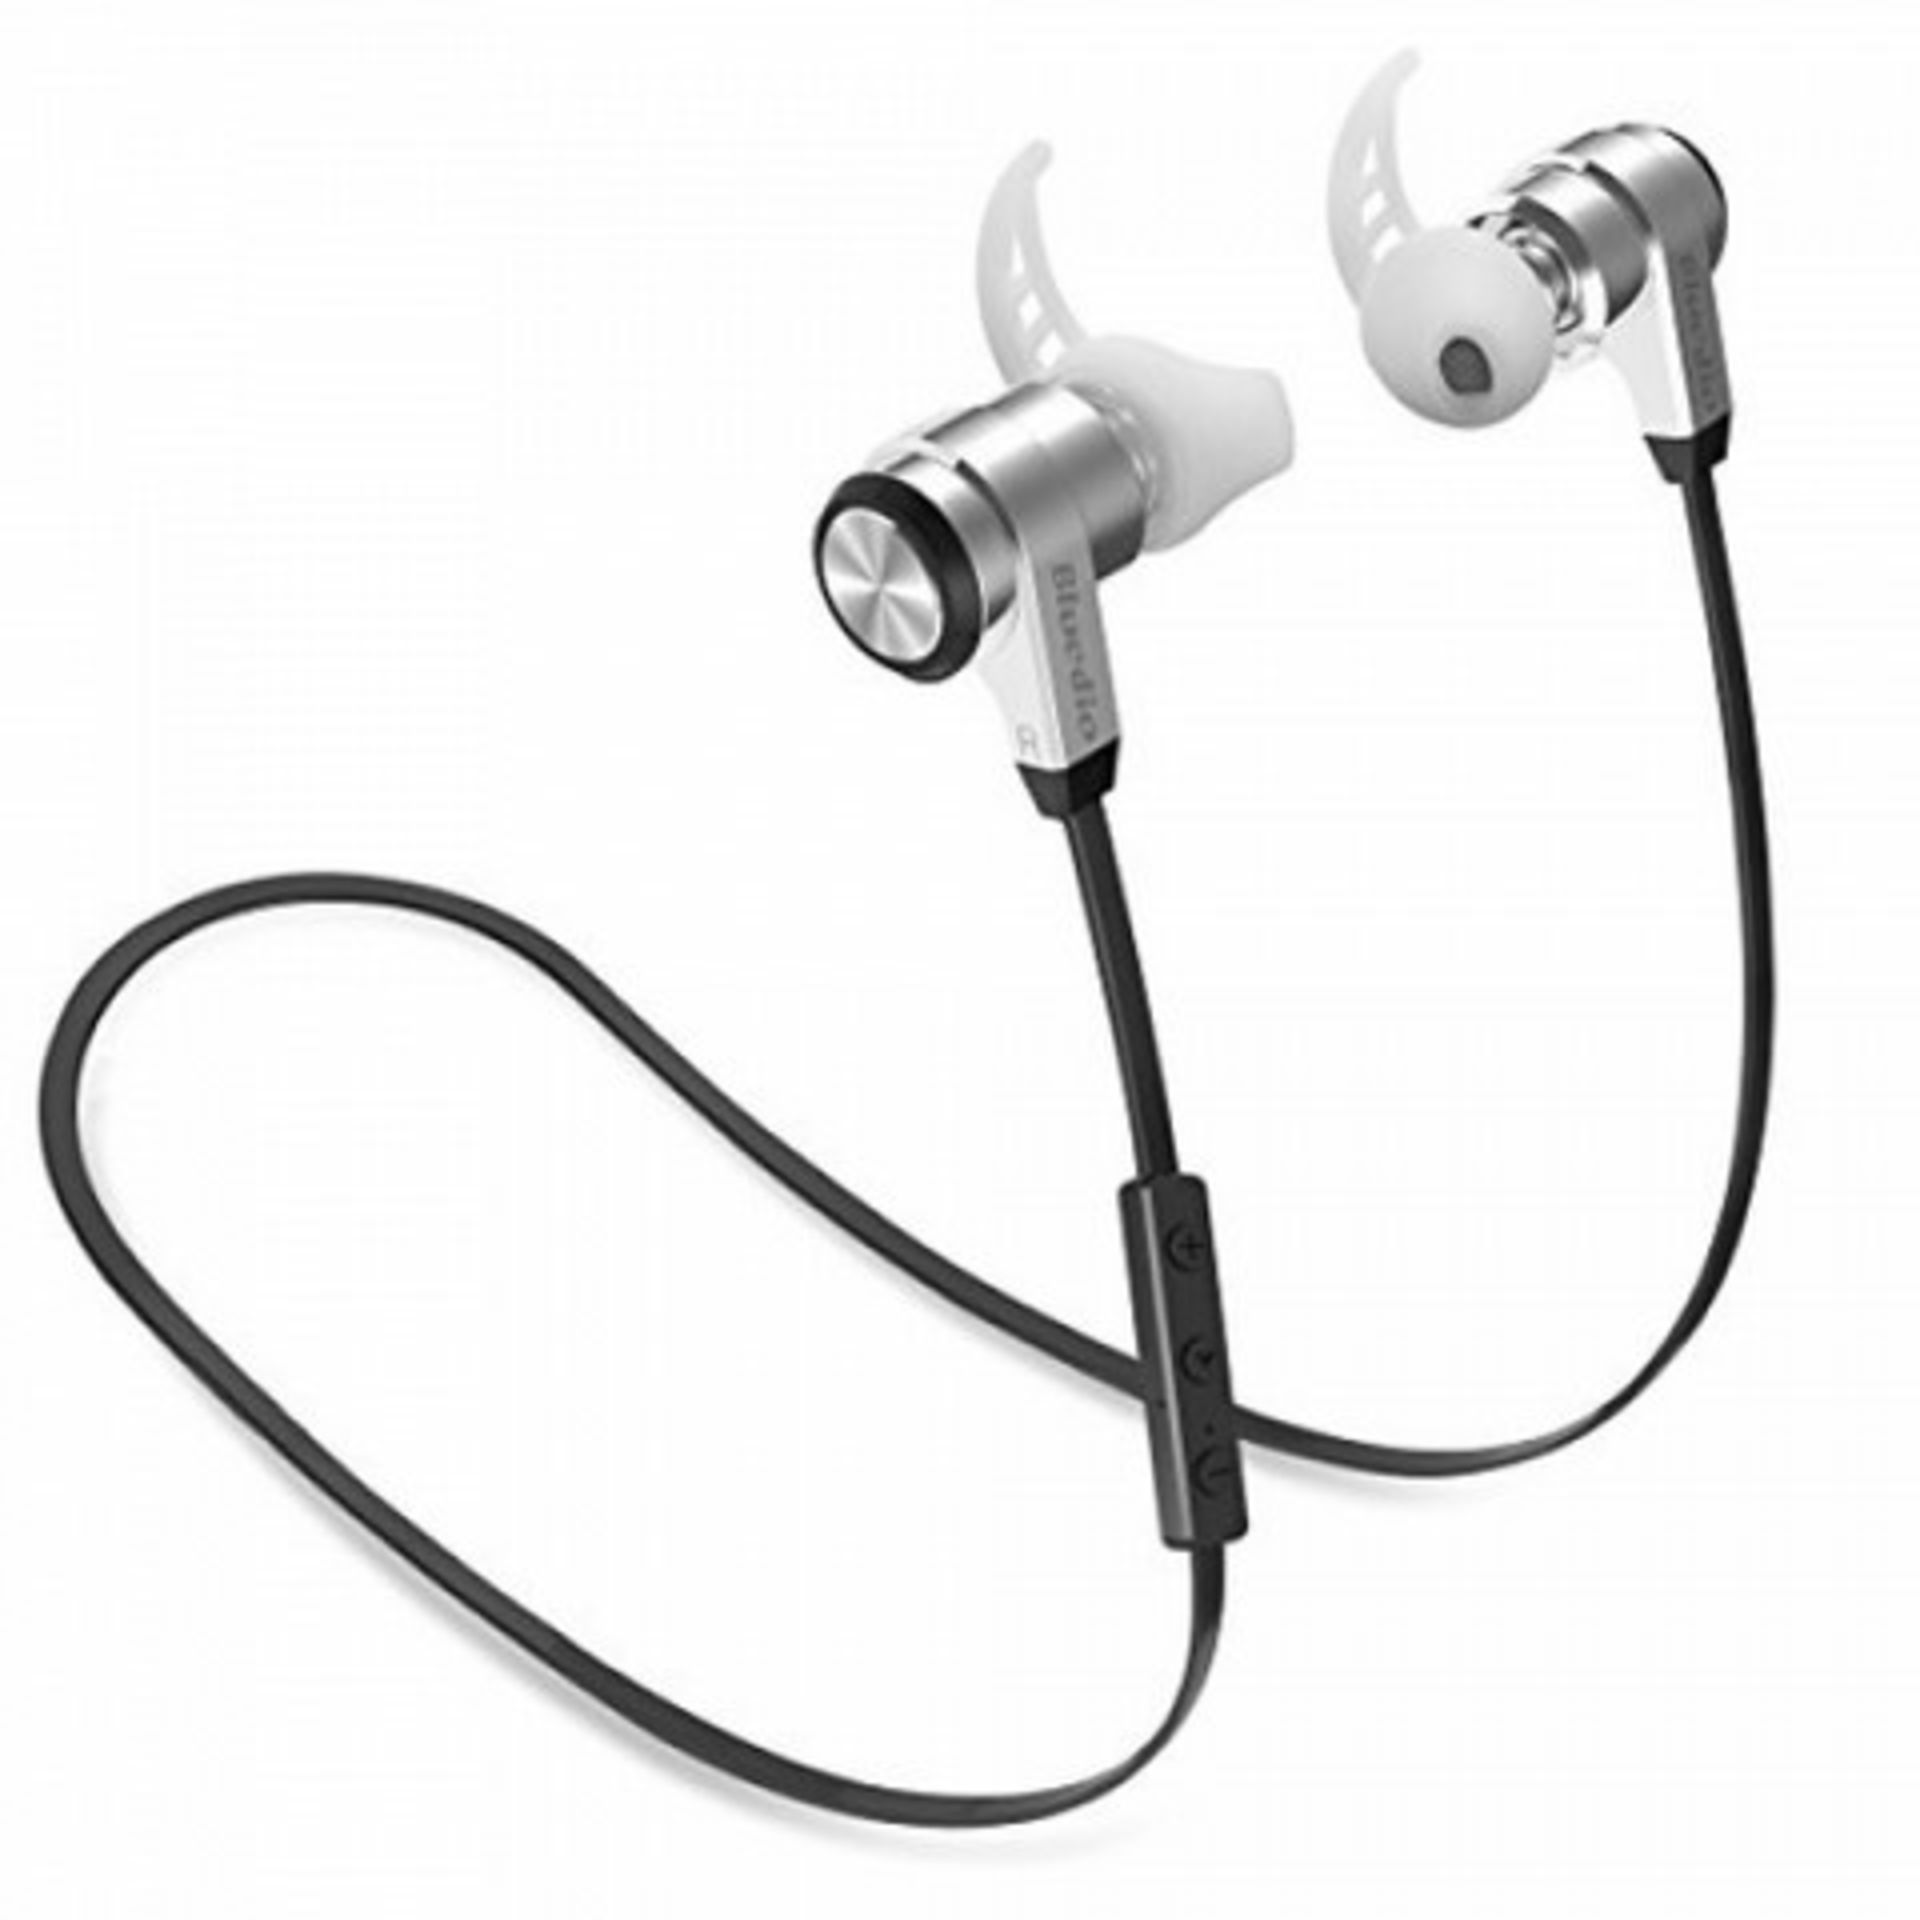 V Grade U Pair of Bluetooth Earphones/Headset (All Boxed) - Colours and Styles/Makes May Vary - Some - Image 4 of 7